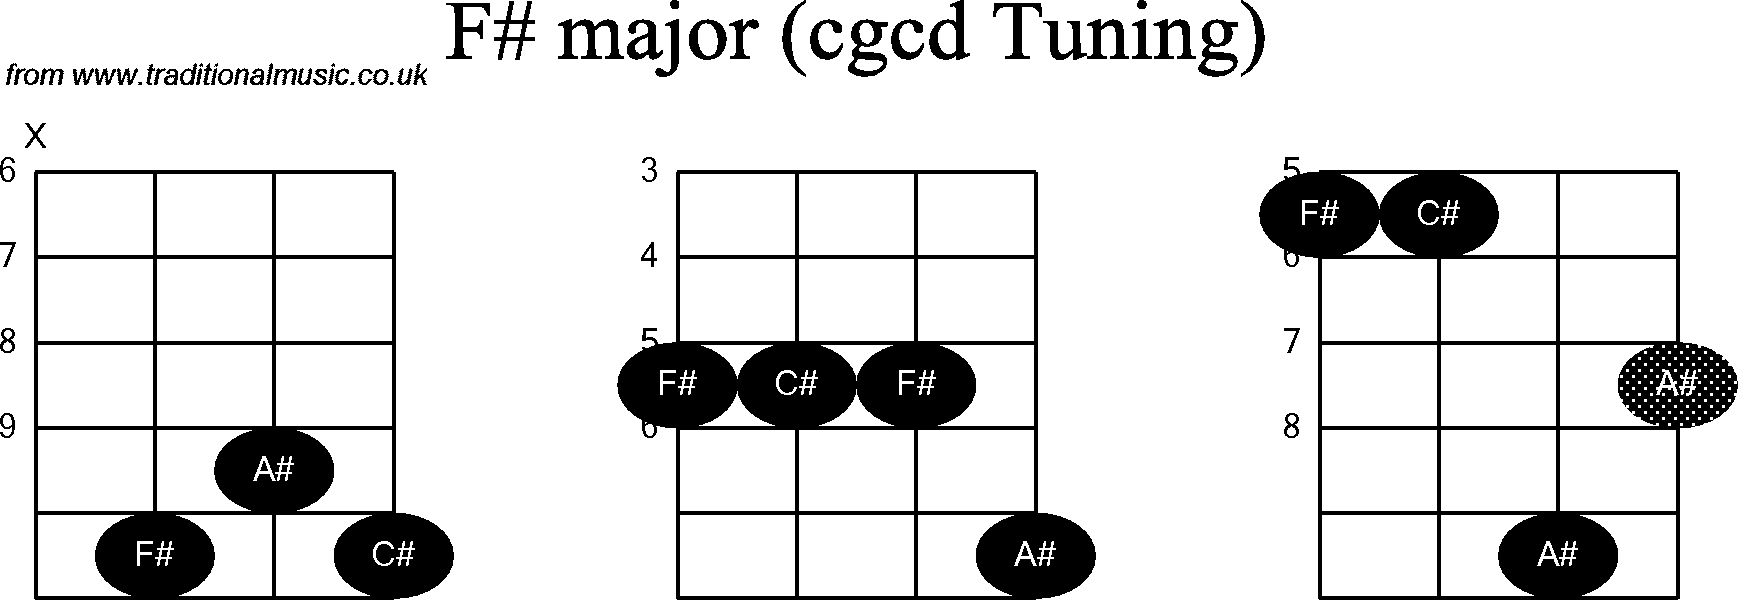 Chord diagrams for Banjo(Double C) F#